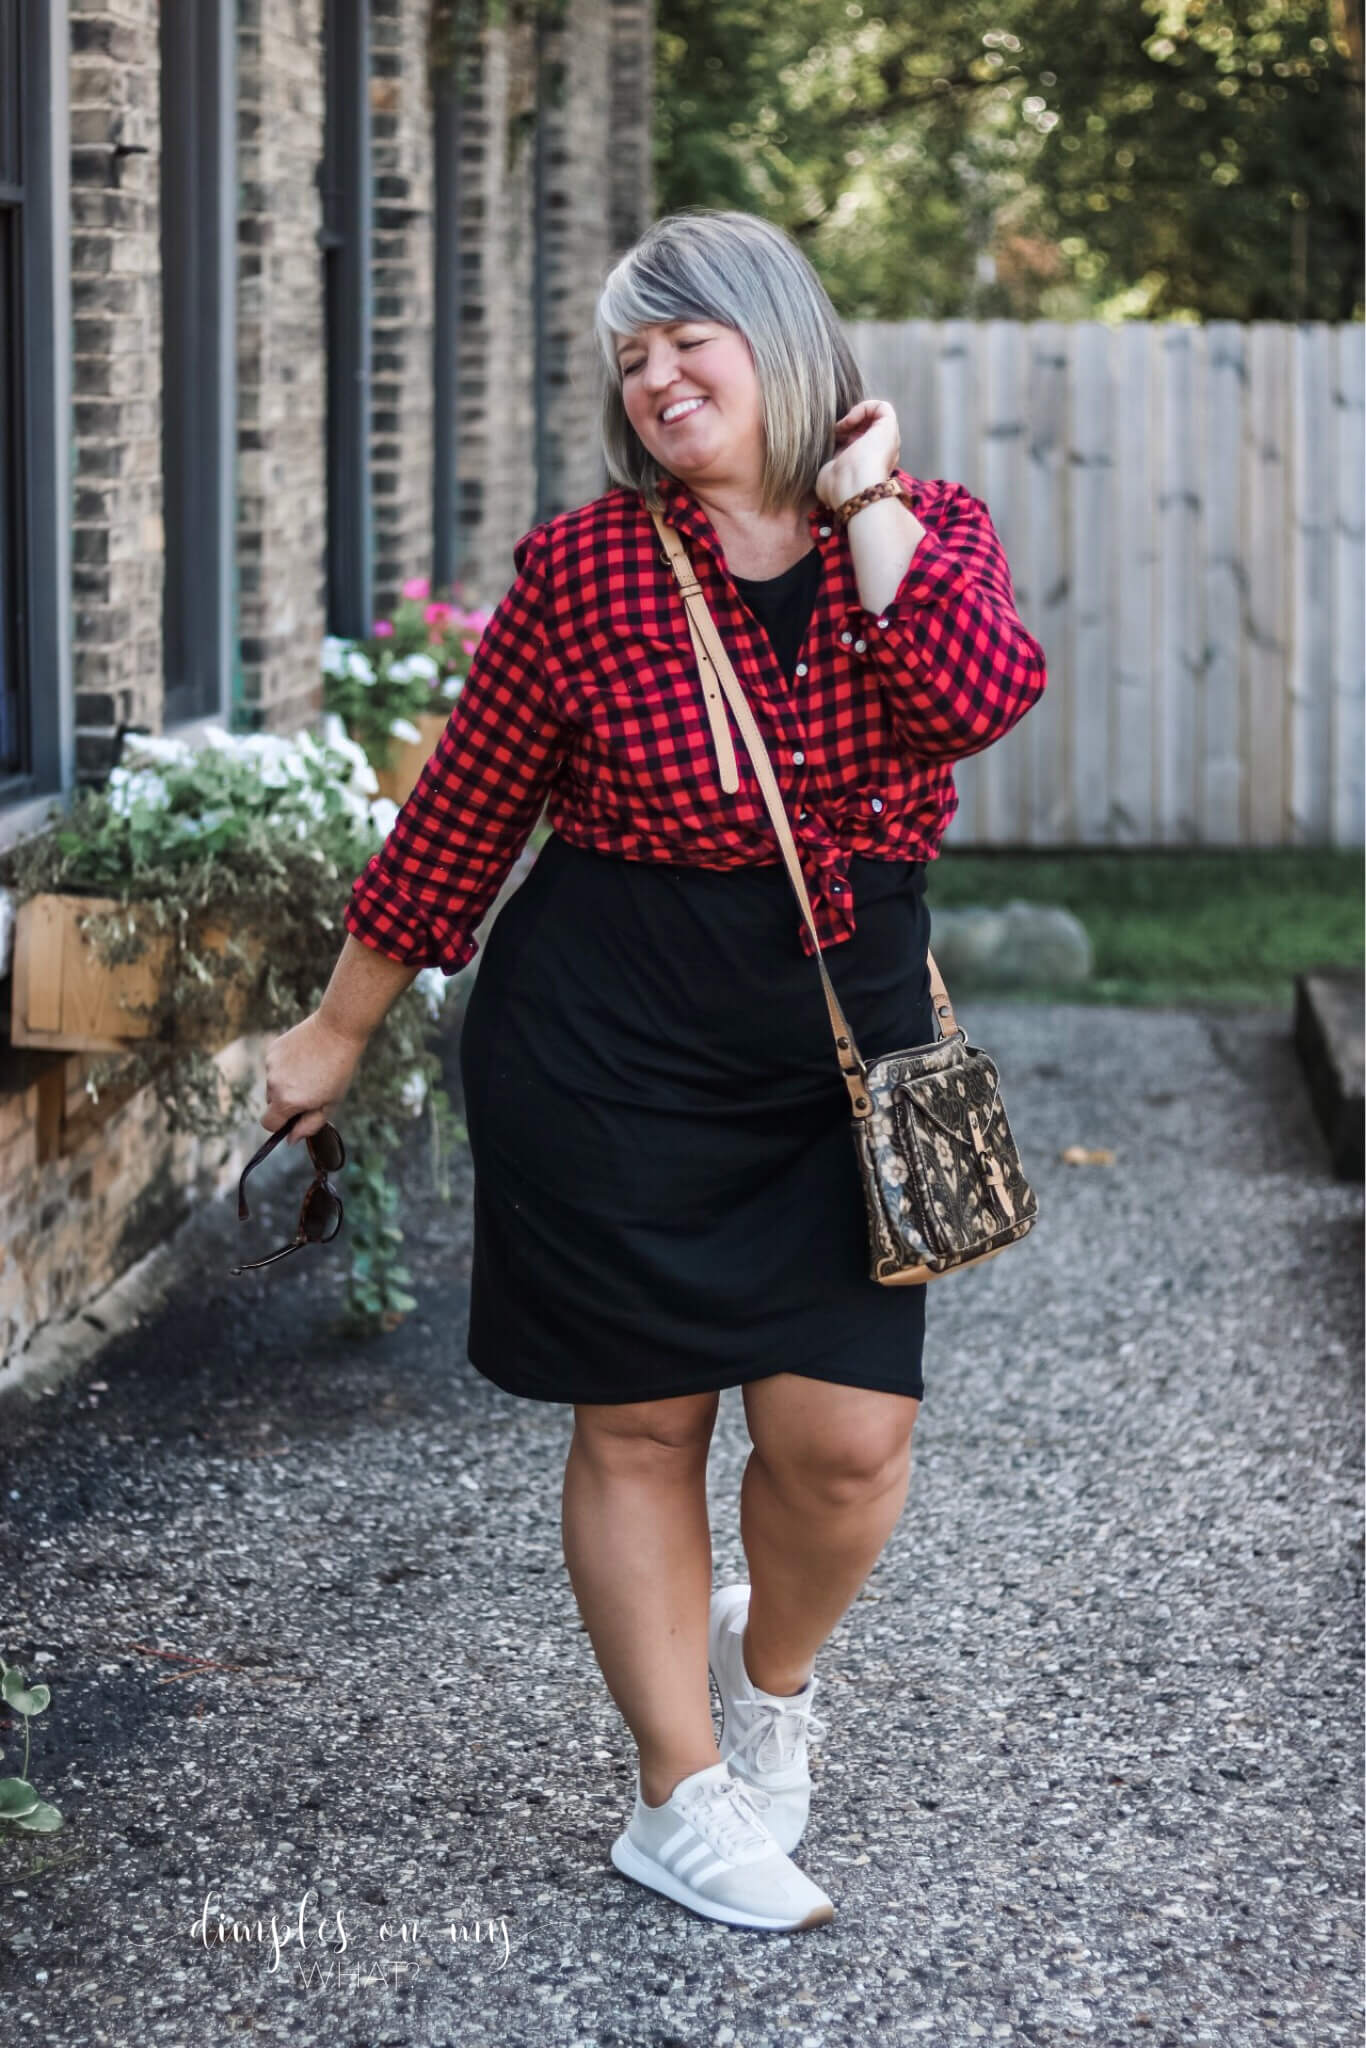 Black knit t-shirt dress with buffalo plaid button-down and sneakers. How to style an LBD for day.